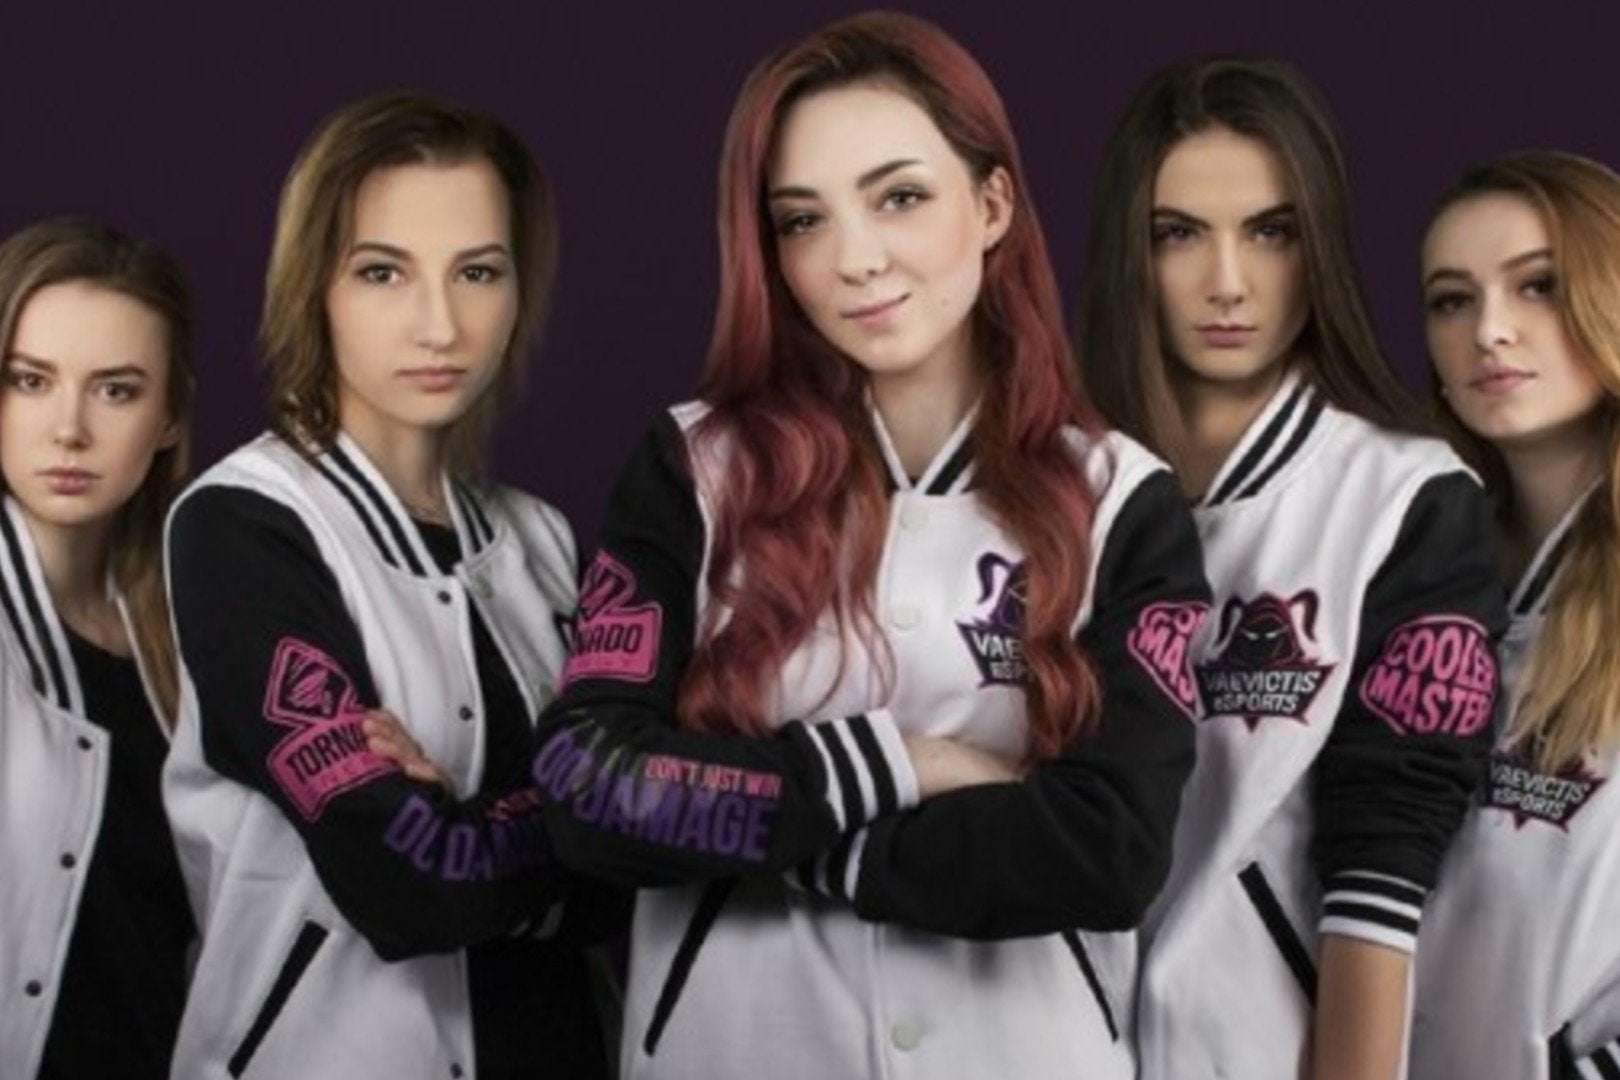 image for All-female League of Legends team Vaevictis kicked out of the LCL